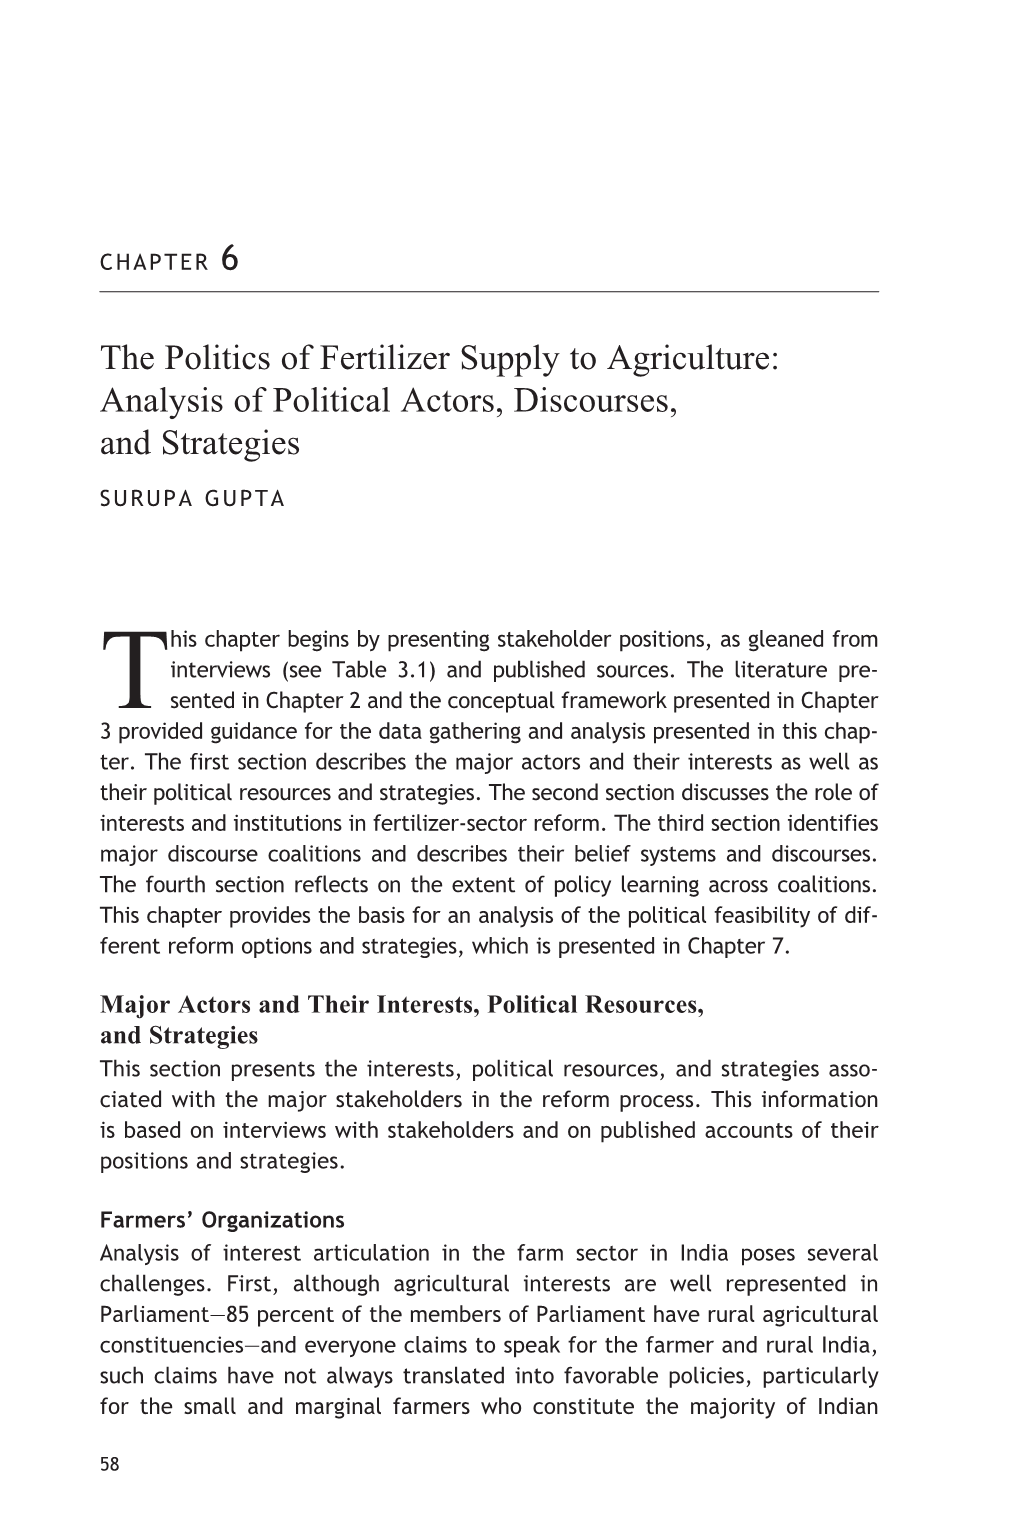 The Political Economy of Agricultural Policy Reform